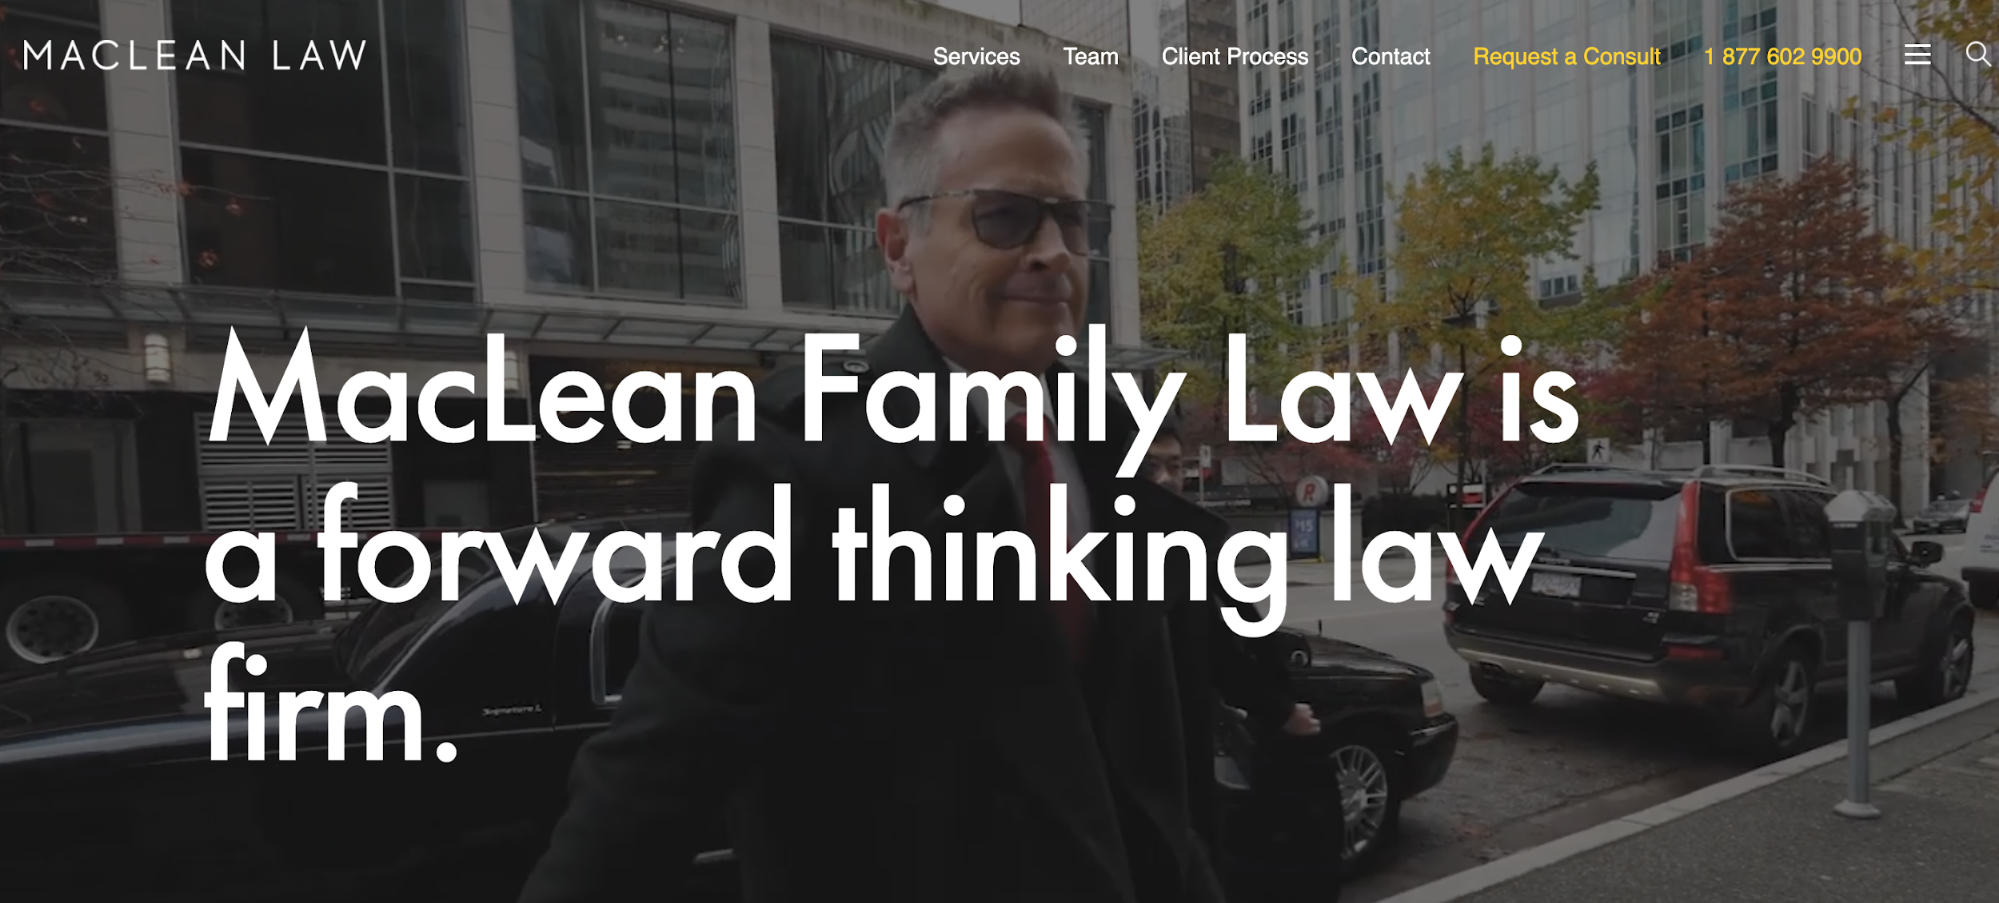 MacLean Family Law uses a bold UVP and landing page video